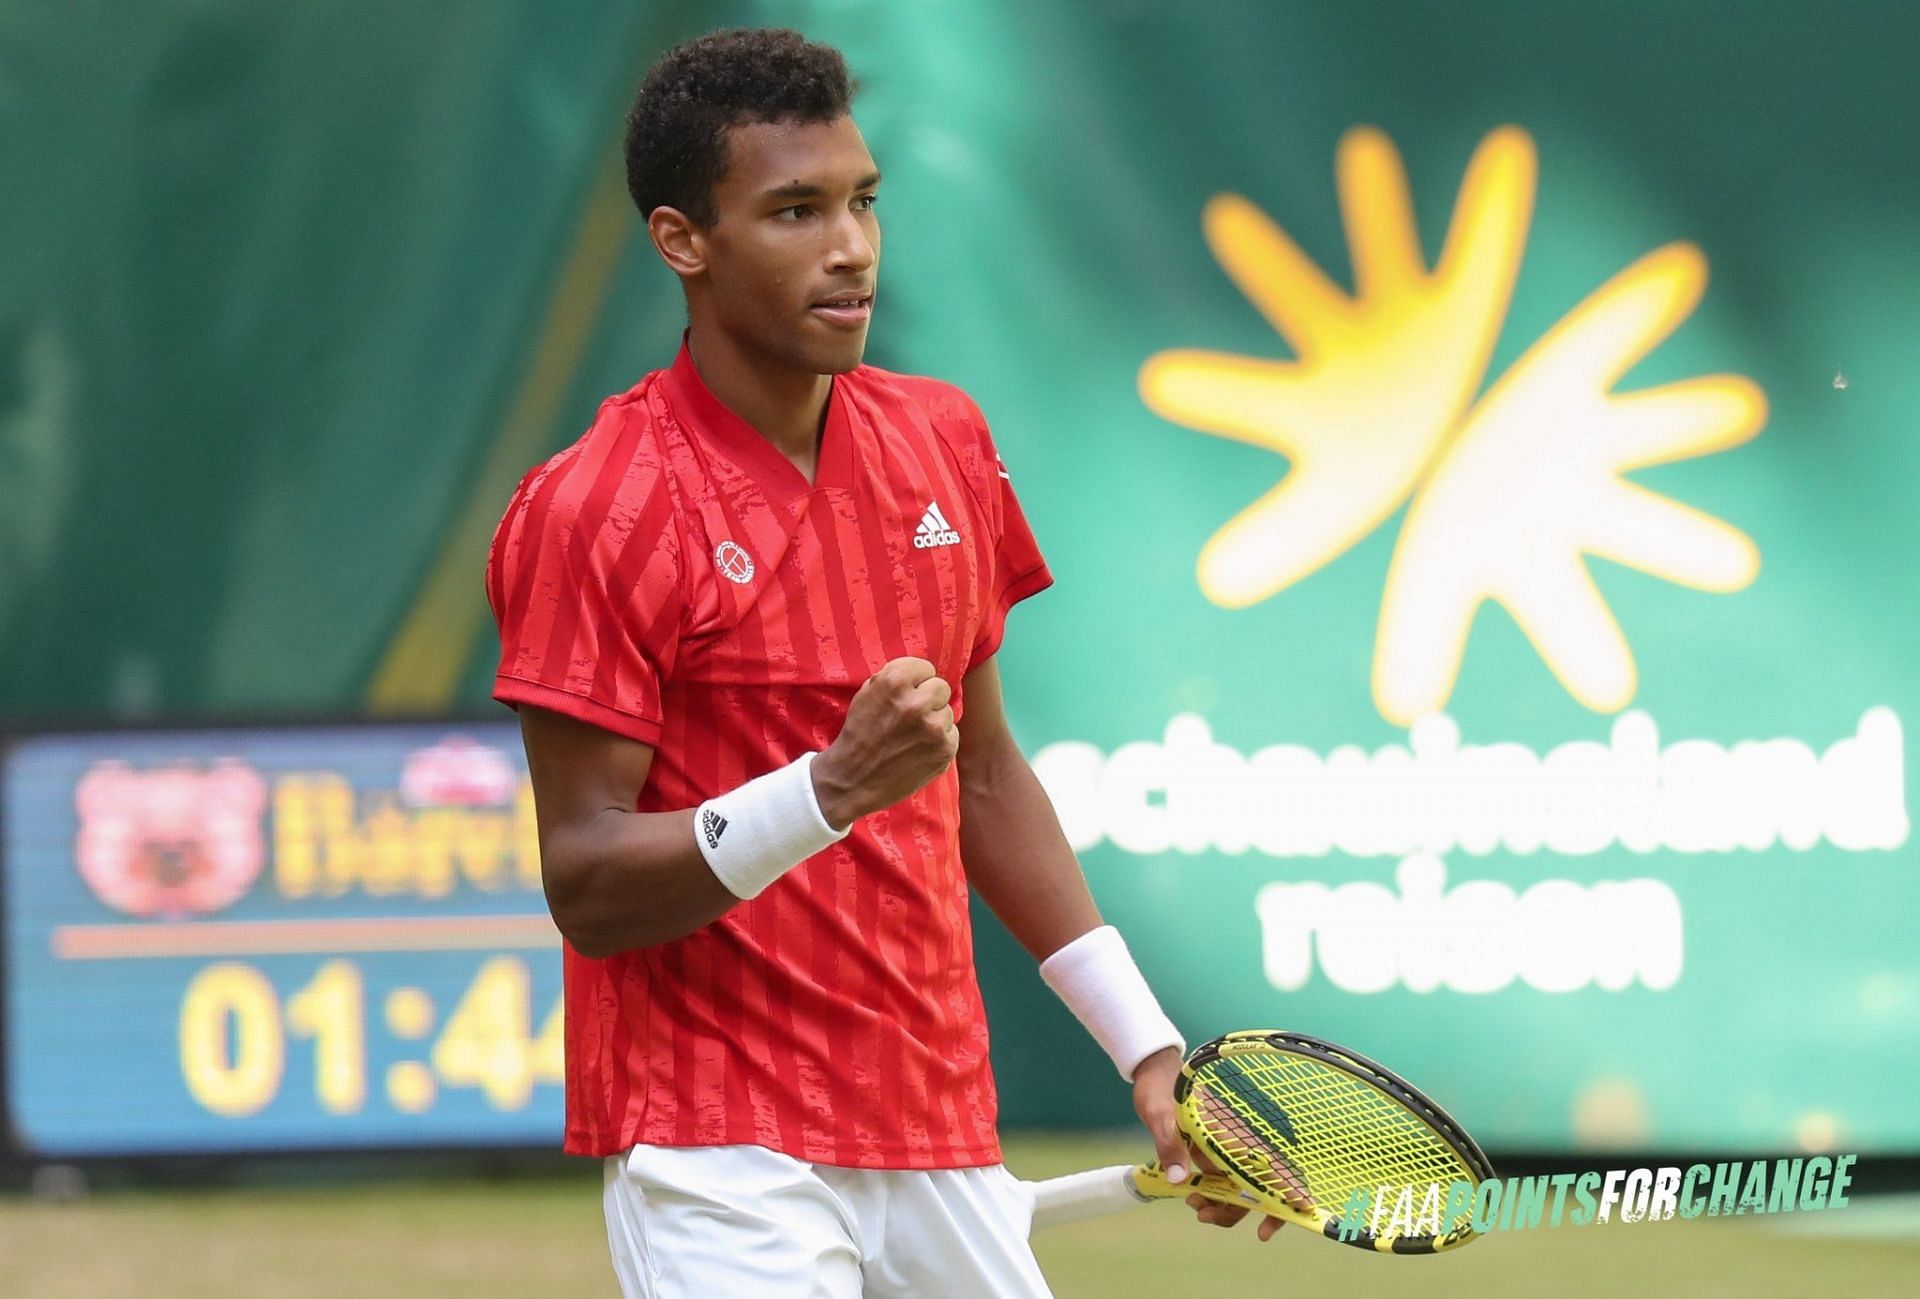 Auger-Aliassime at the Halle Open